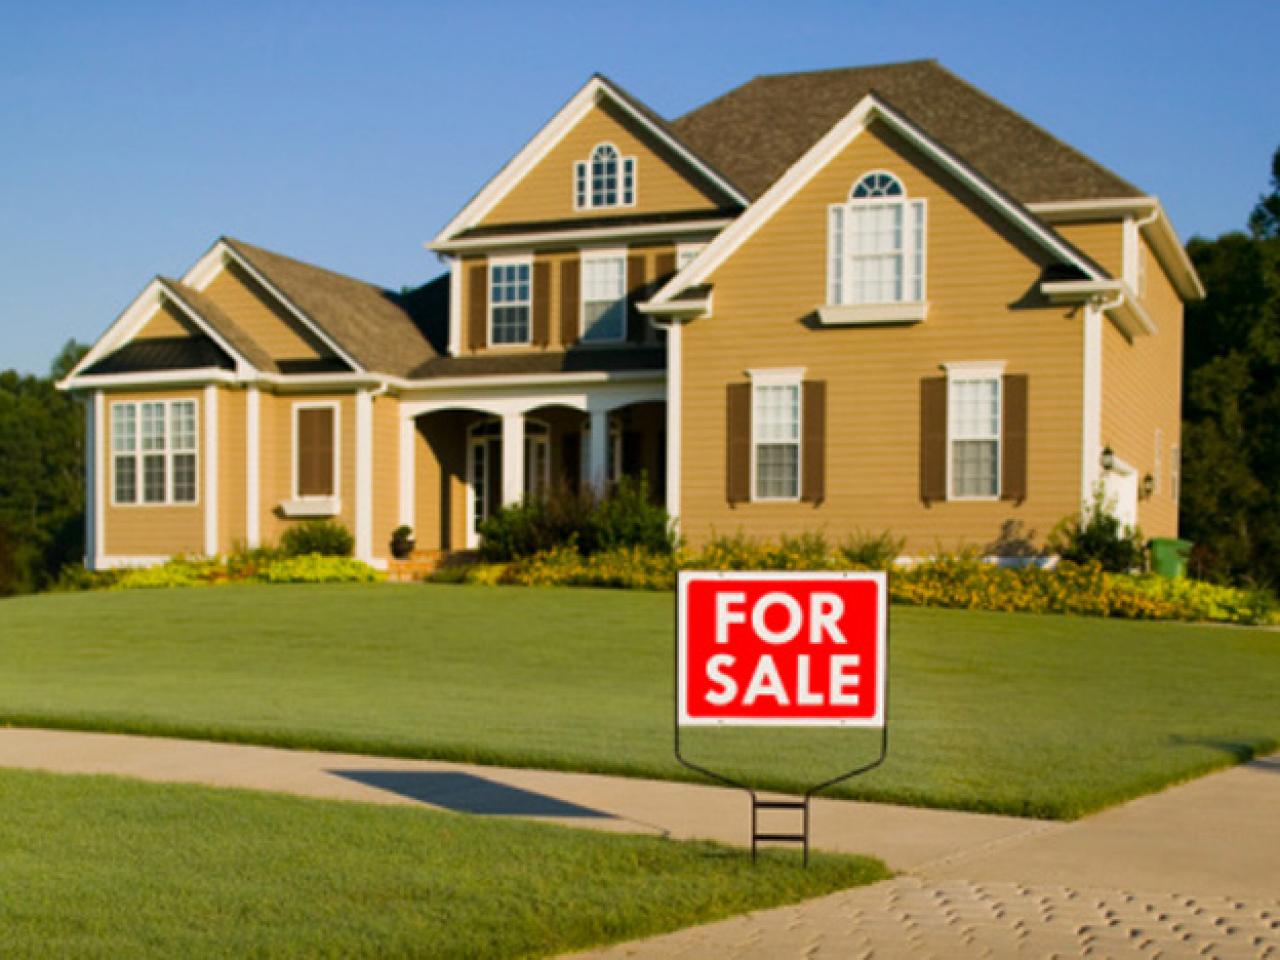 During The Warm Summer Months, Here Are Some Helpful Selling Tips For Your Home